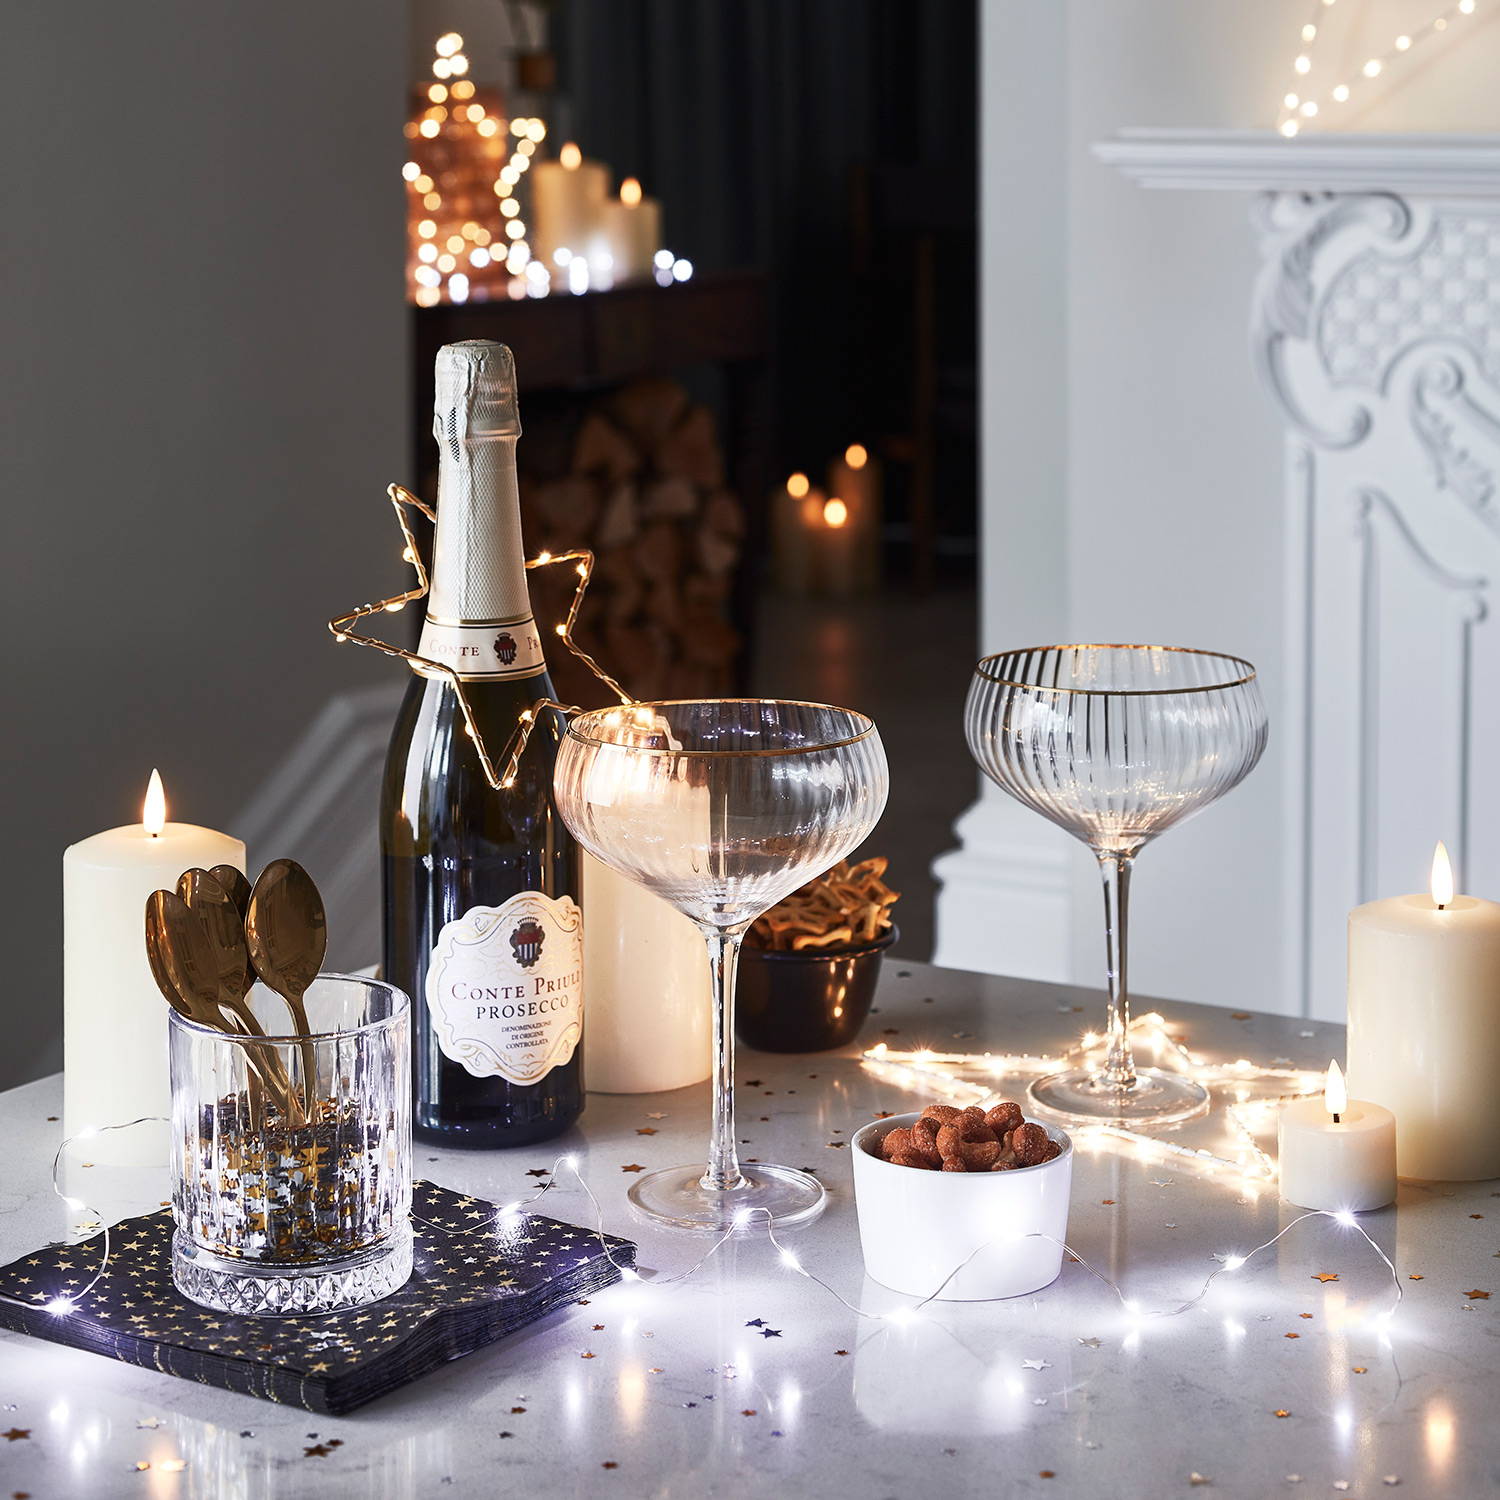 Table with prosecco, glasses, LED candles, star lights and fairy lights.